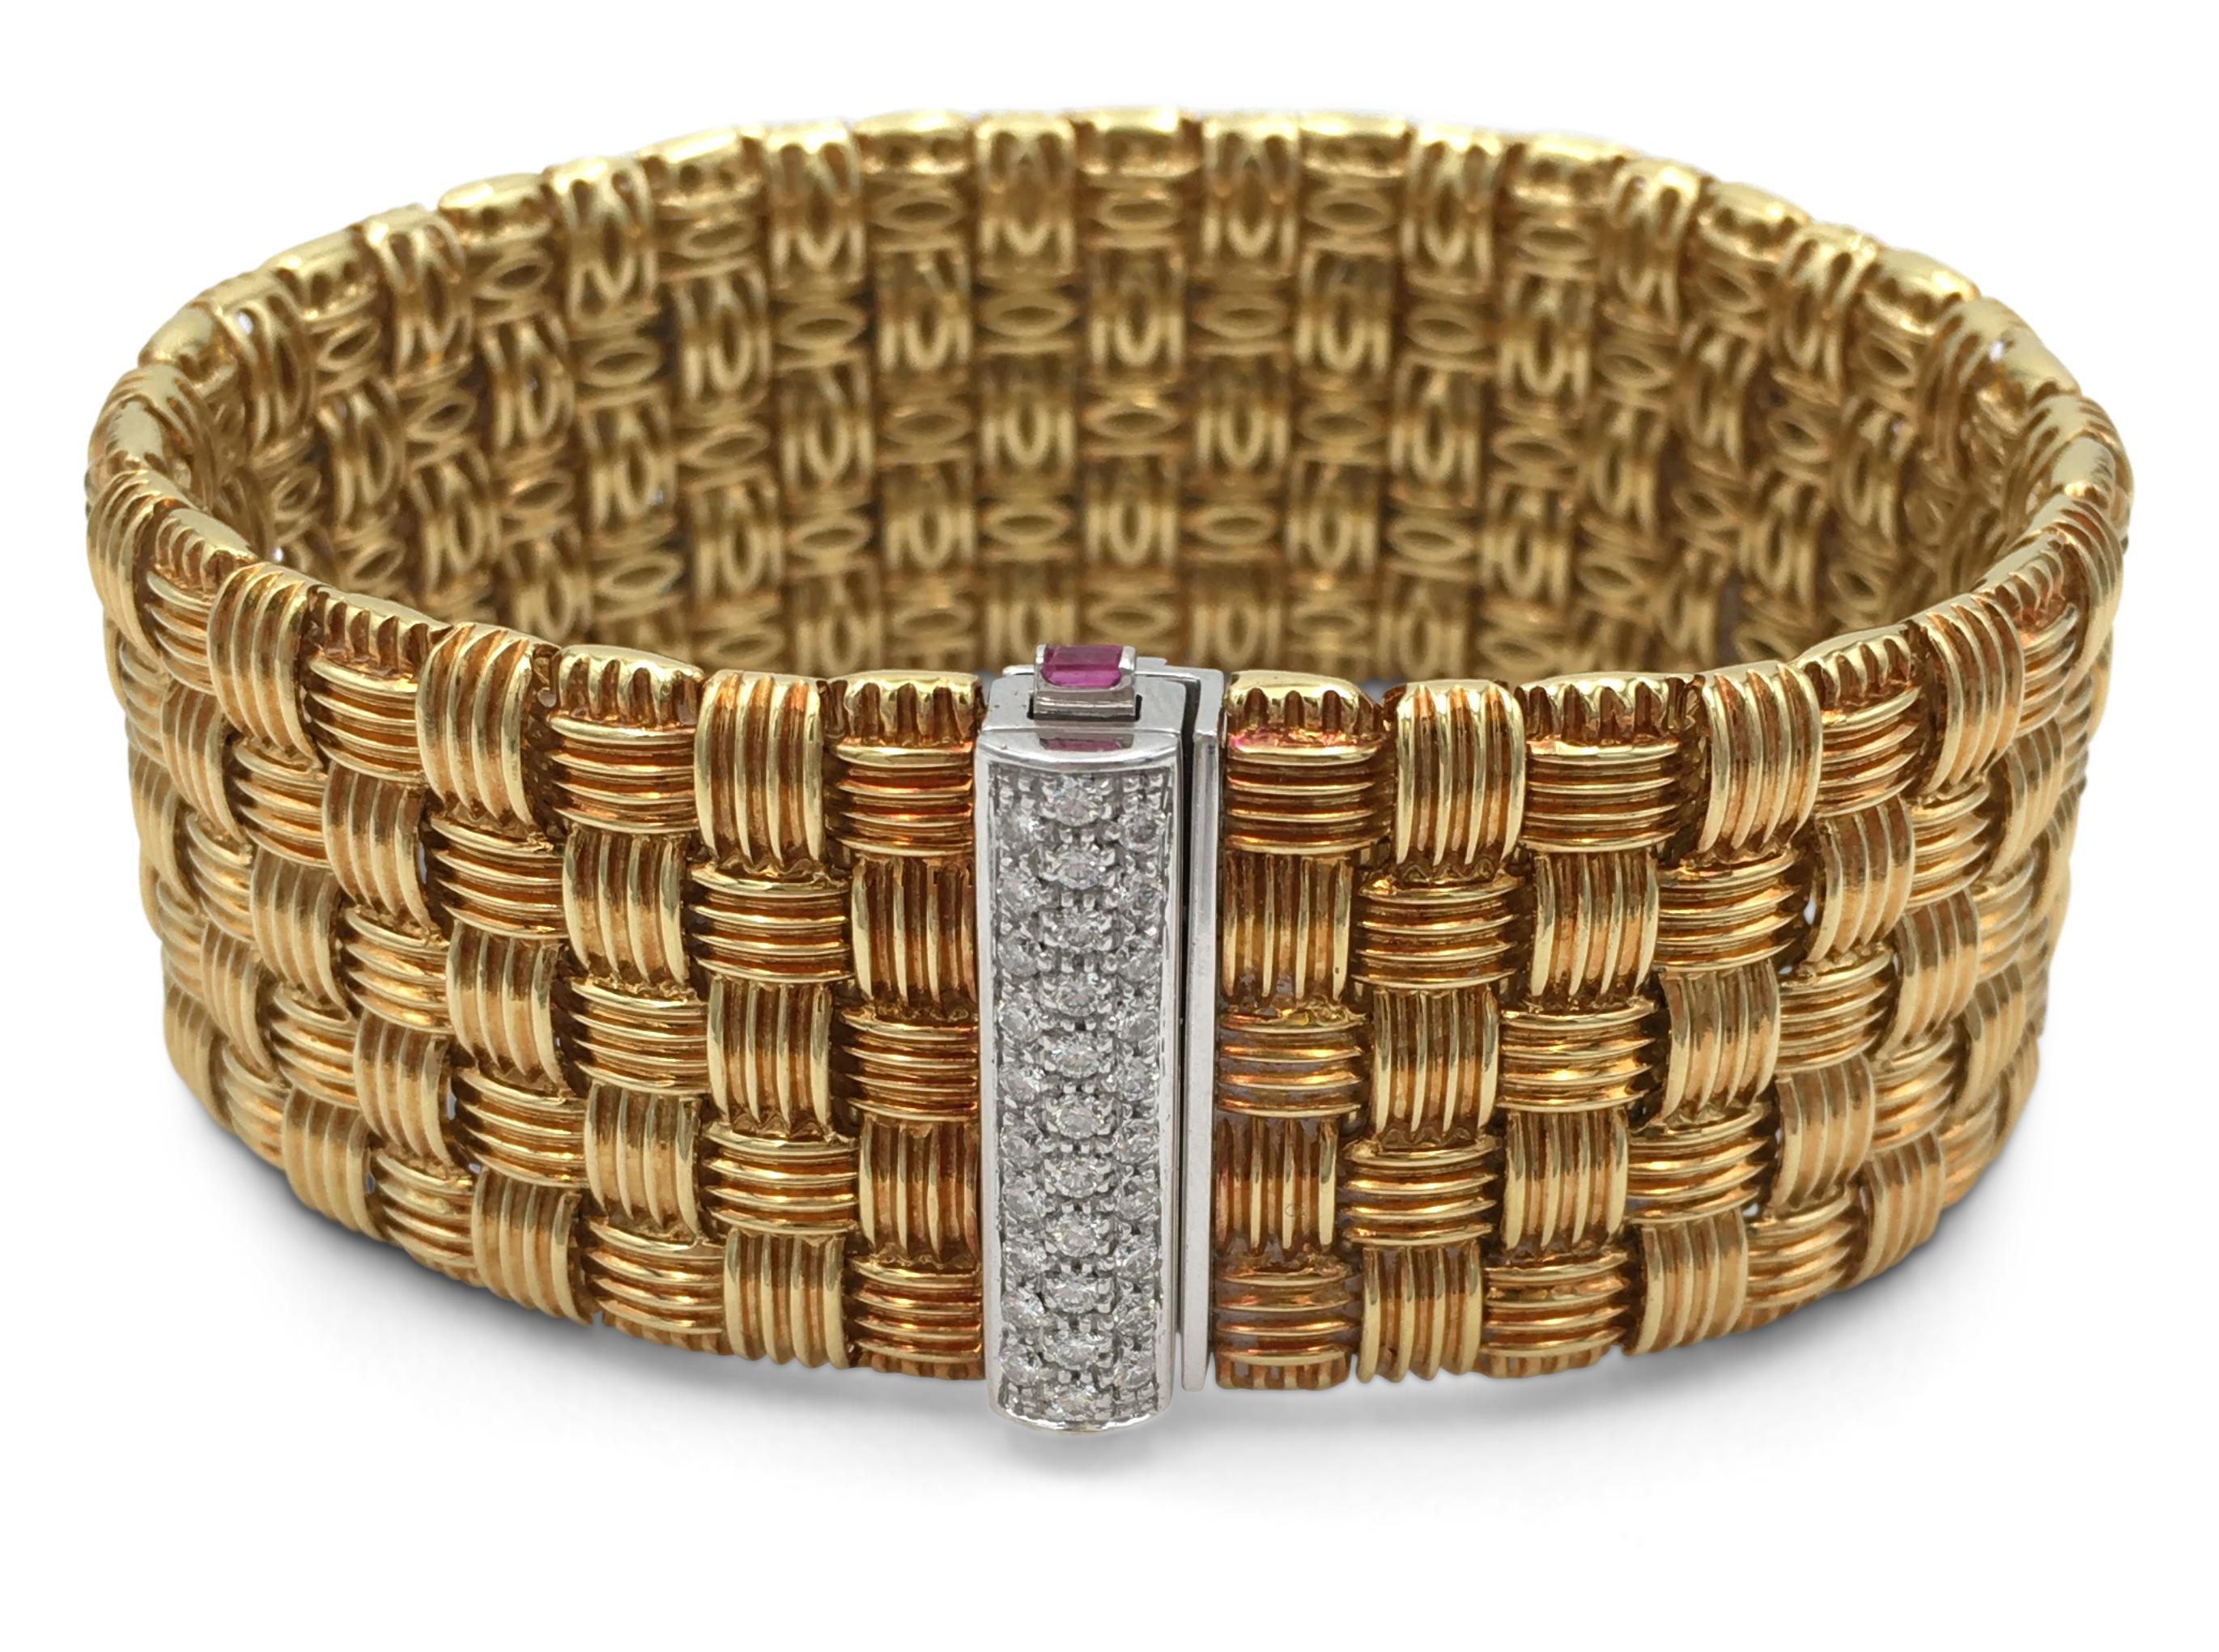 Authentic Roberto Coin 18 karat yellow gold flexible five-row woven look bracelet with a diamond-encrusted clasp from the Appassionata collection. The round brilliant cut diamonds (F-G in color, VS-SI clarity) estimated at 0.30 carats total are set